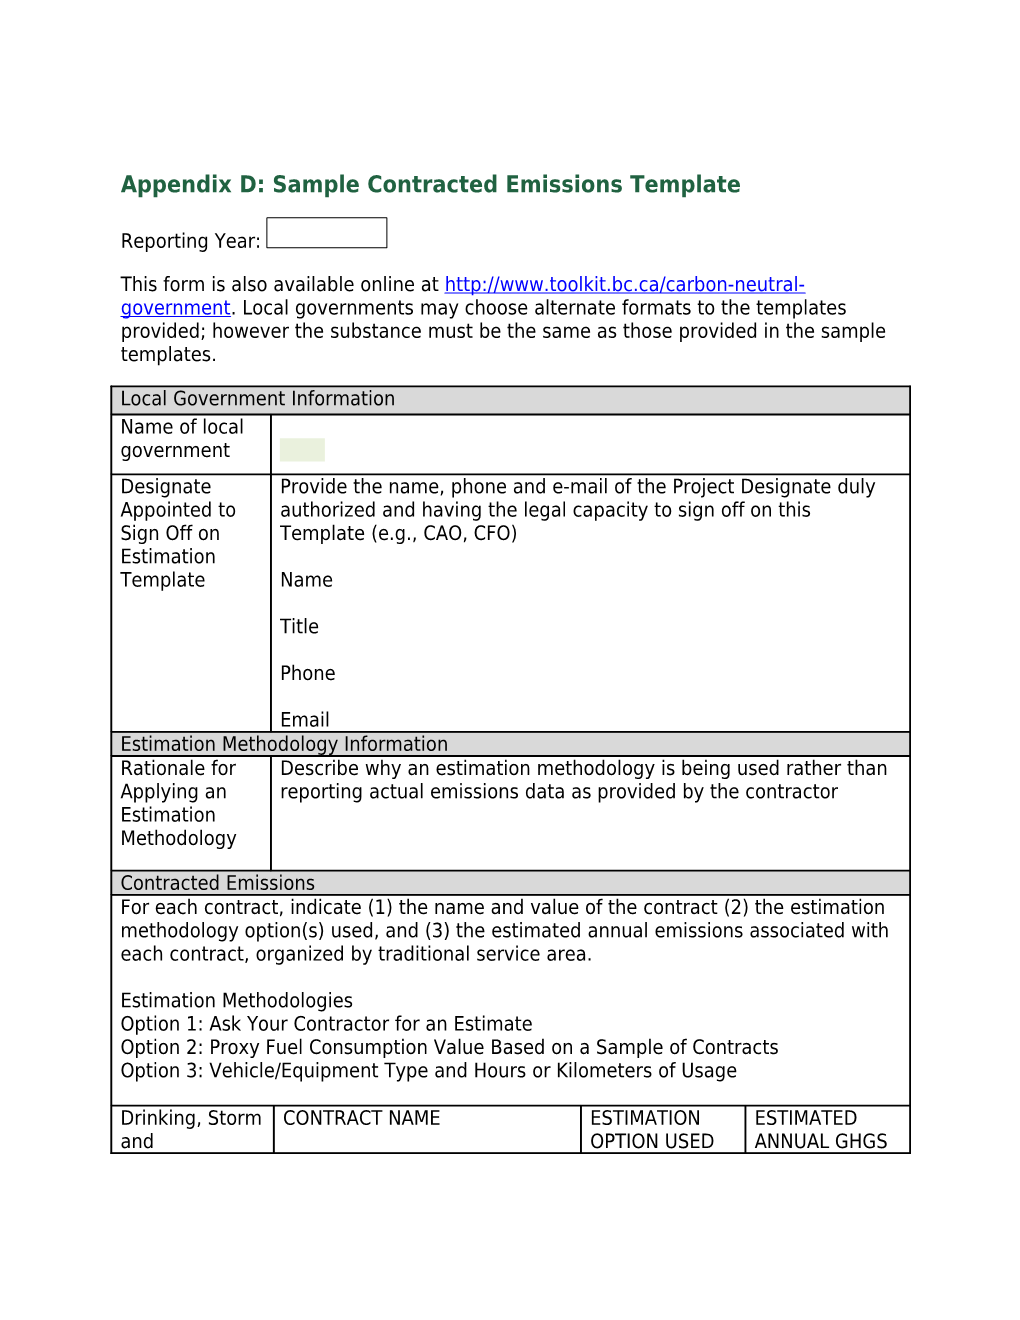 Appendix D: Sample Contracted Emissions Template